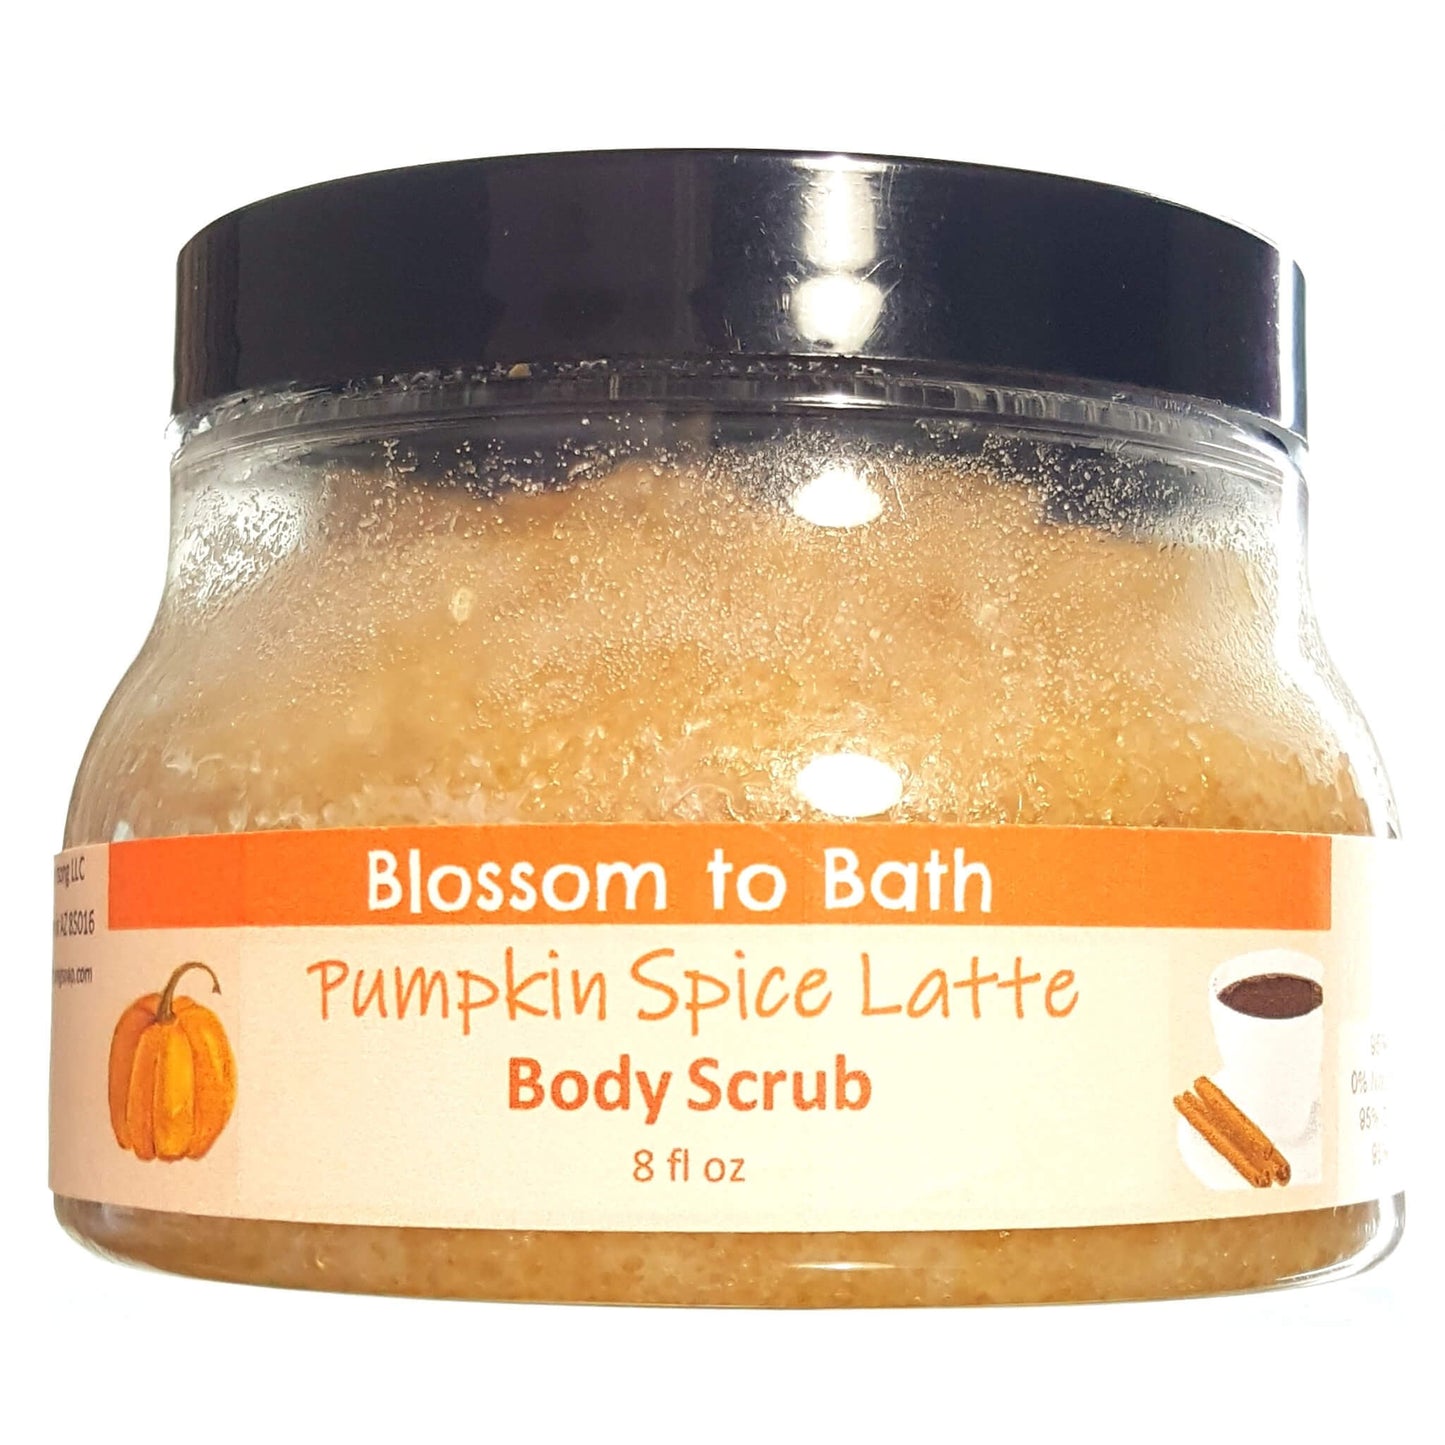 Buy Blossom to Bath Pumpkin Spice Latte Body Scrub from Flowersong Soap Studio.  Large crystal turbinado sugar plus  rich oils conveniently exfoliate and moisturize in one step  Deep vanilla and lightly fruited spice blend seamlessly with rich coffee.